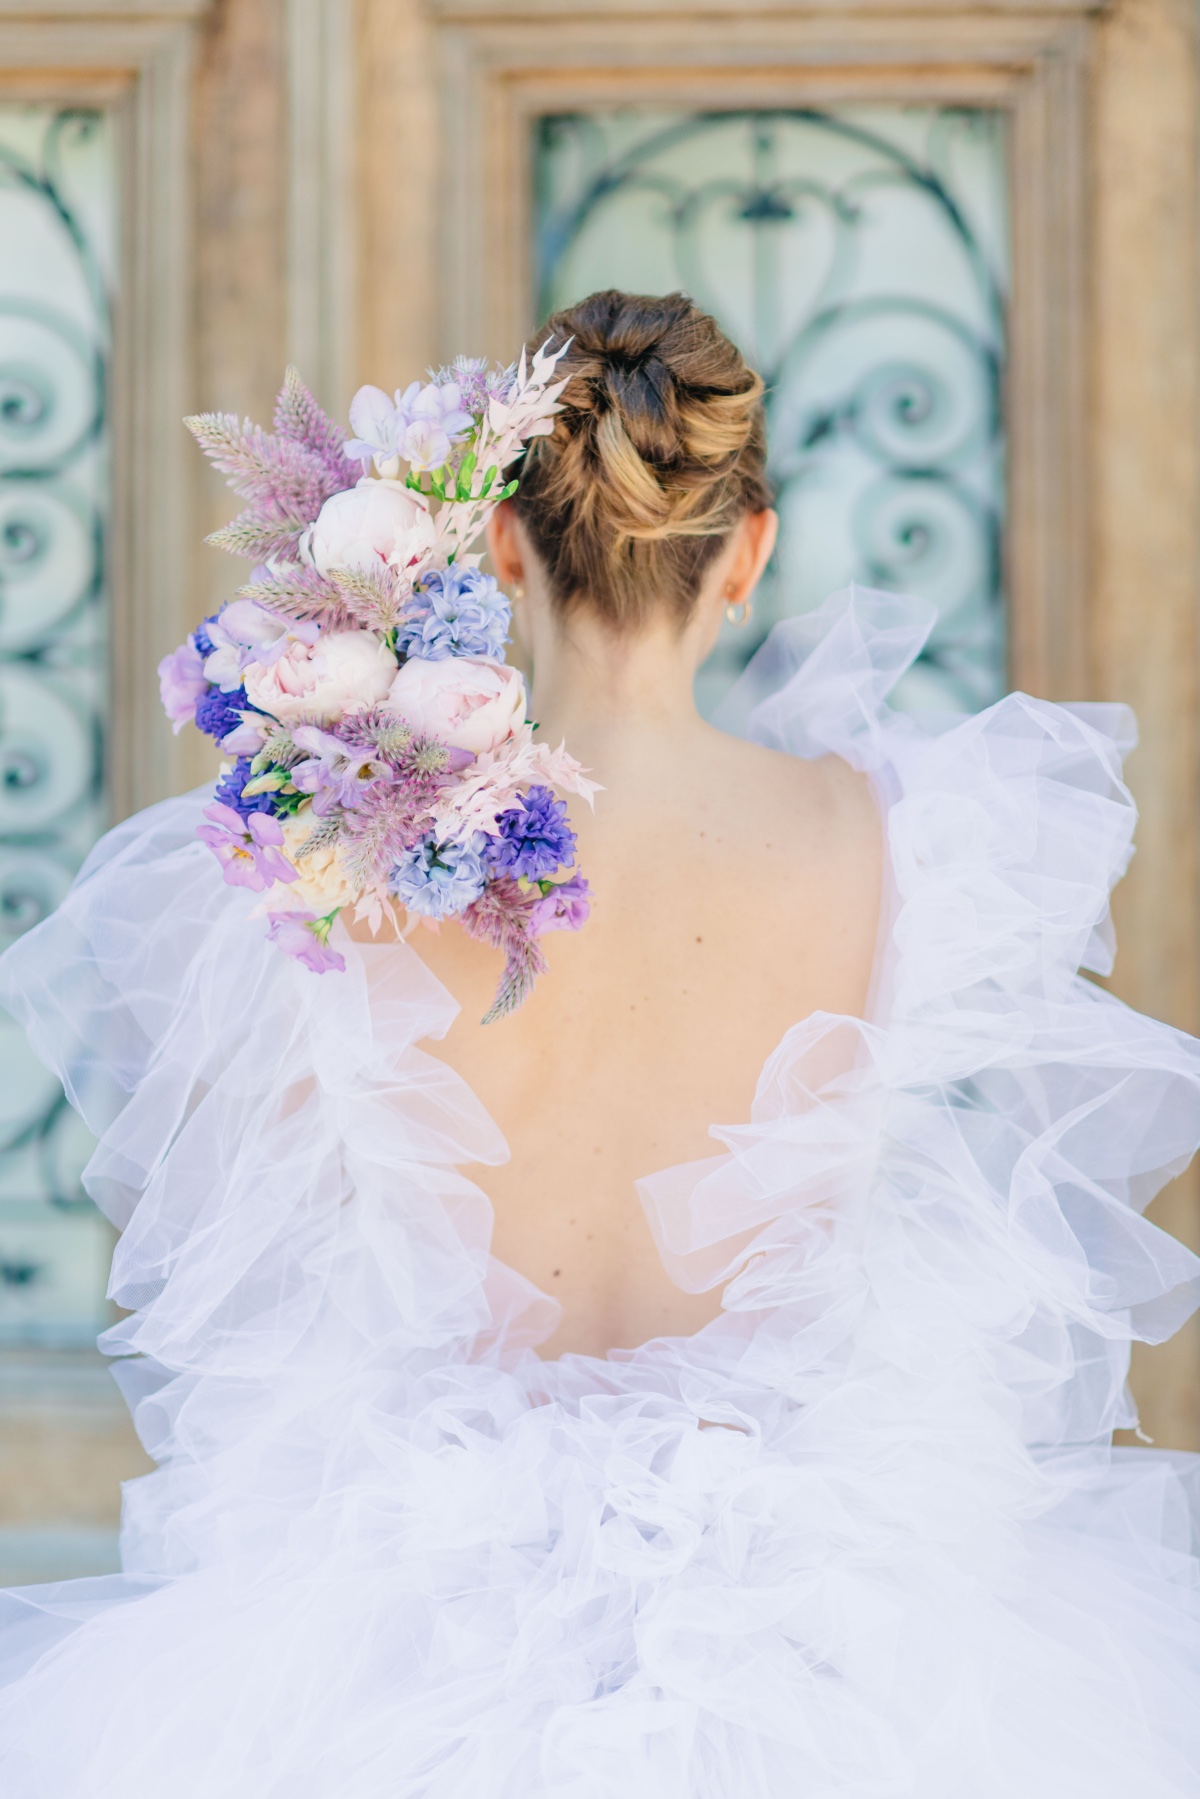 View of bride's updo with bouquet